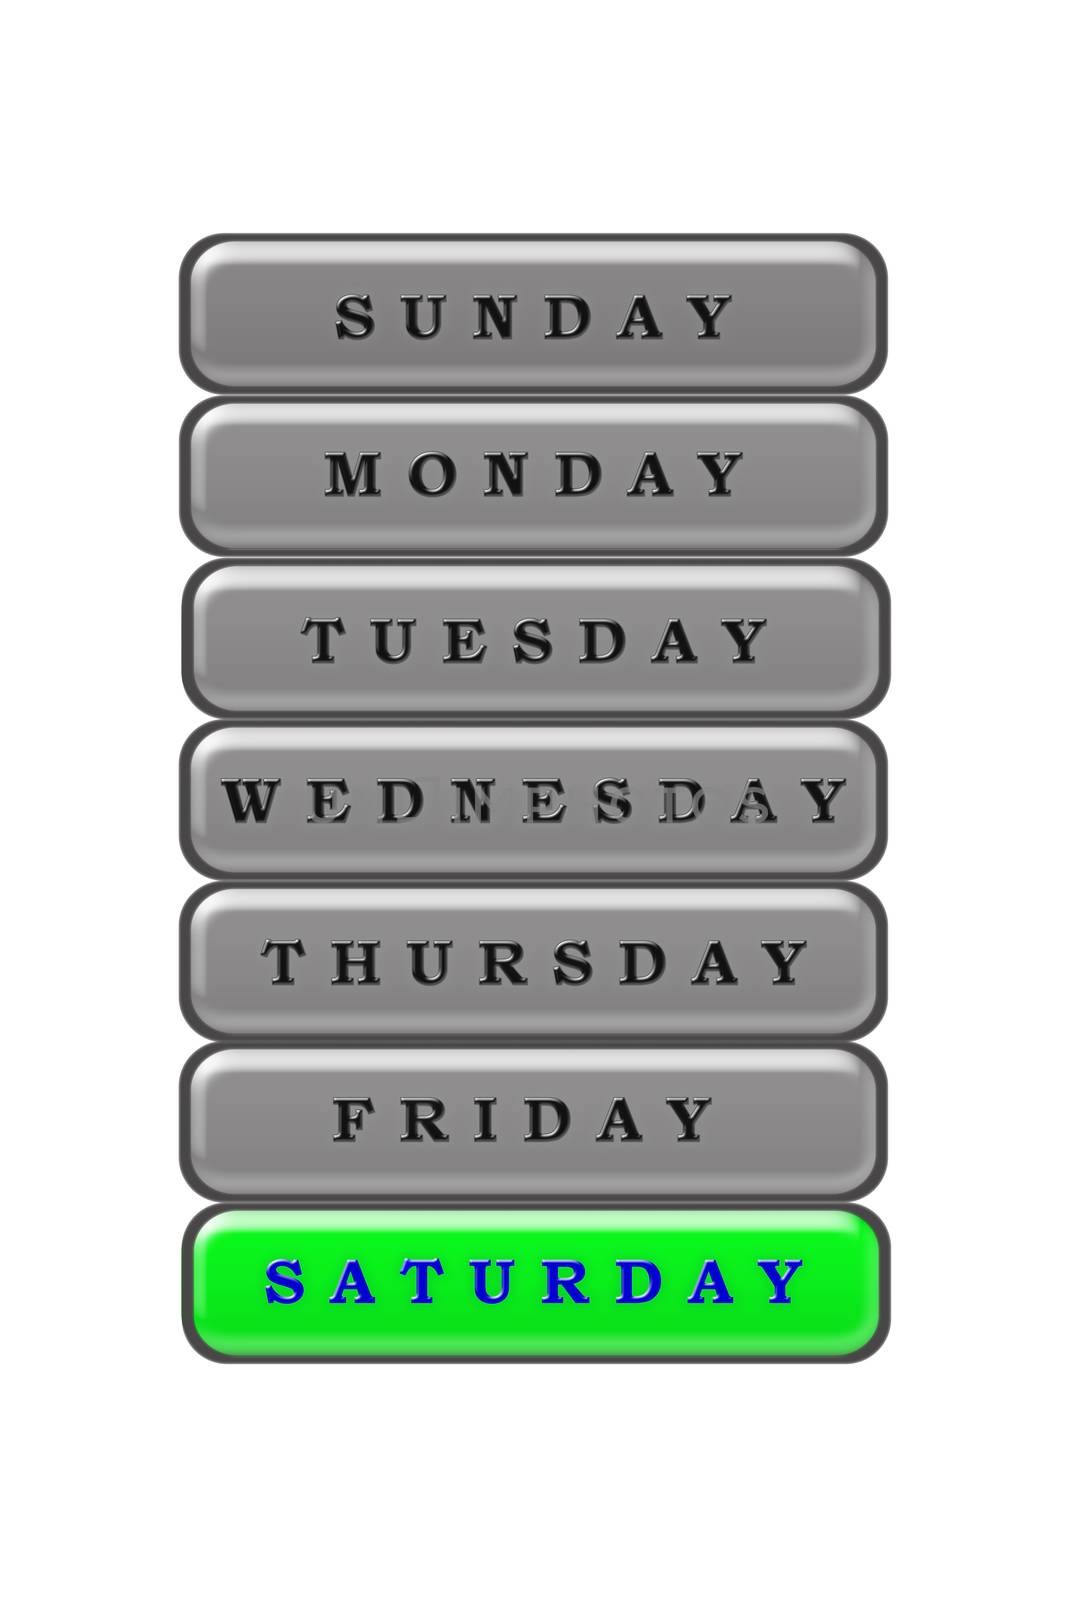 In the days of the week list, Saturday is highlighted in blue on by Grommik